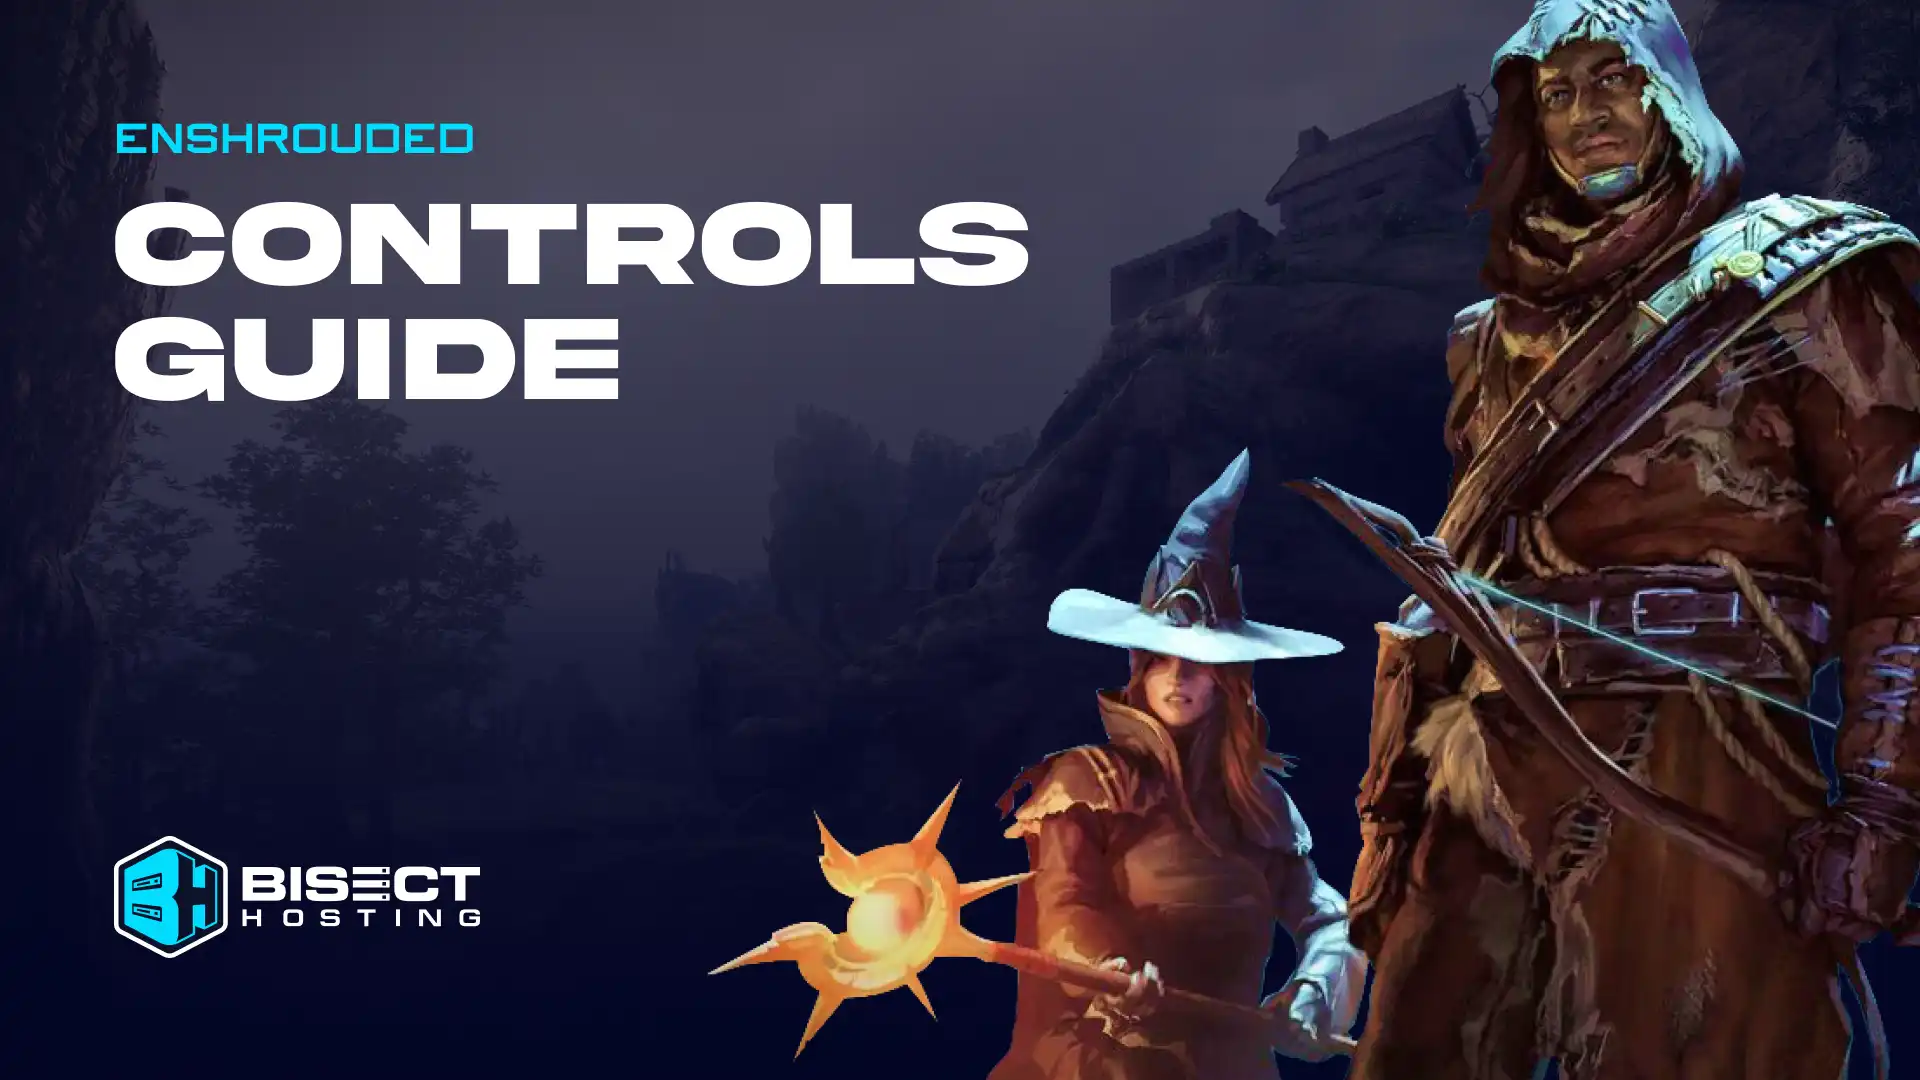 Enshrouded Controls Guide (PC &amp; Console): All Keybinds for Controller, Mouse, &amp; Keyboard